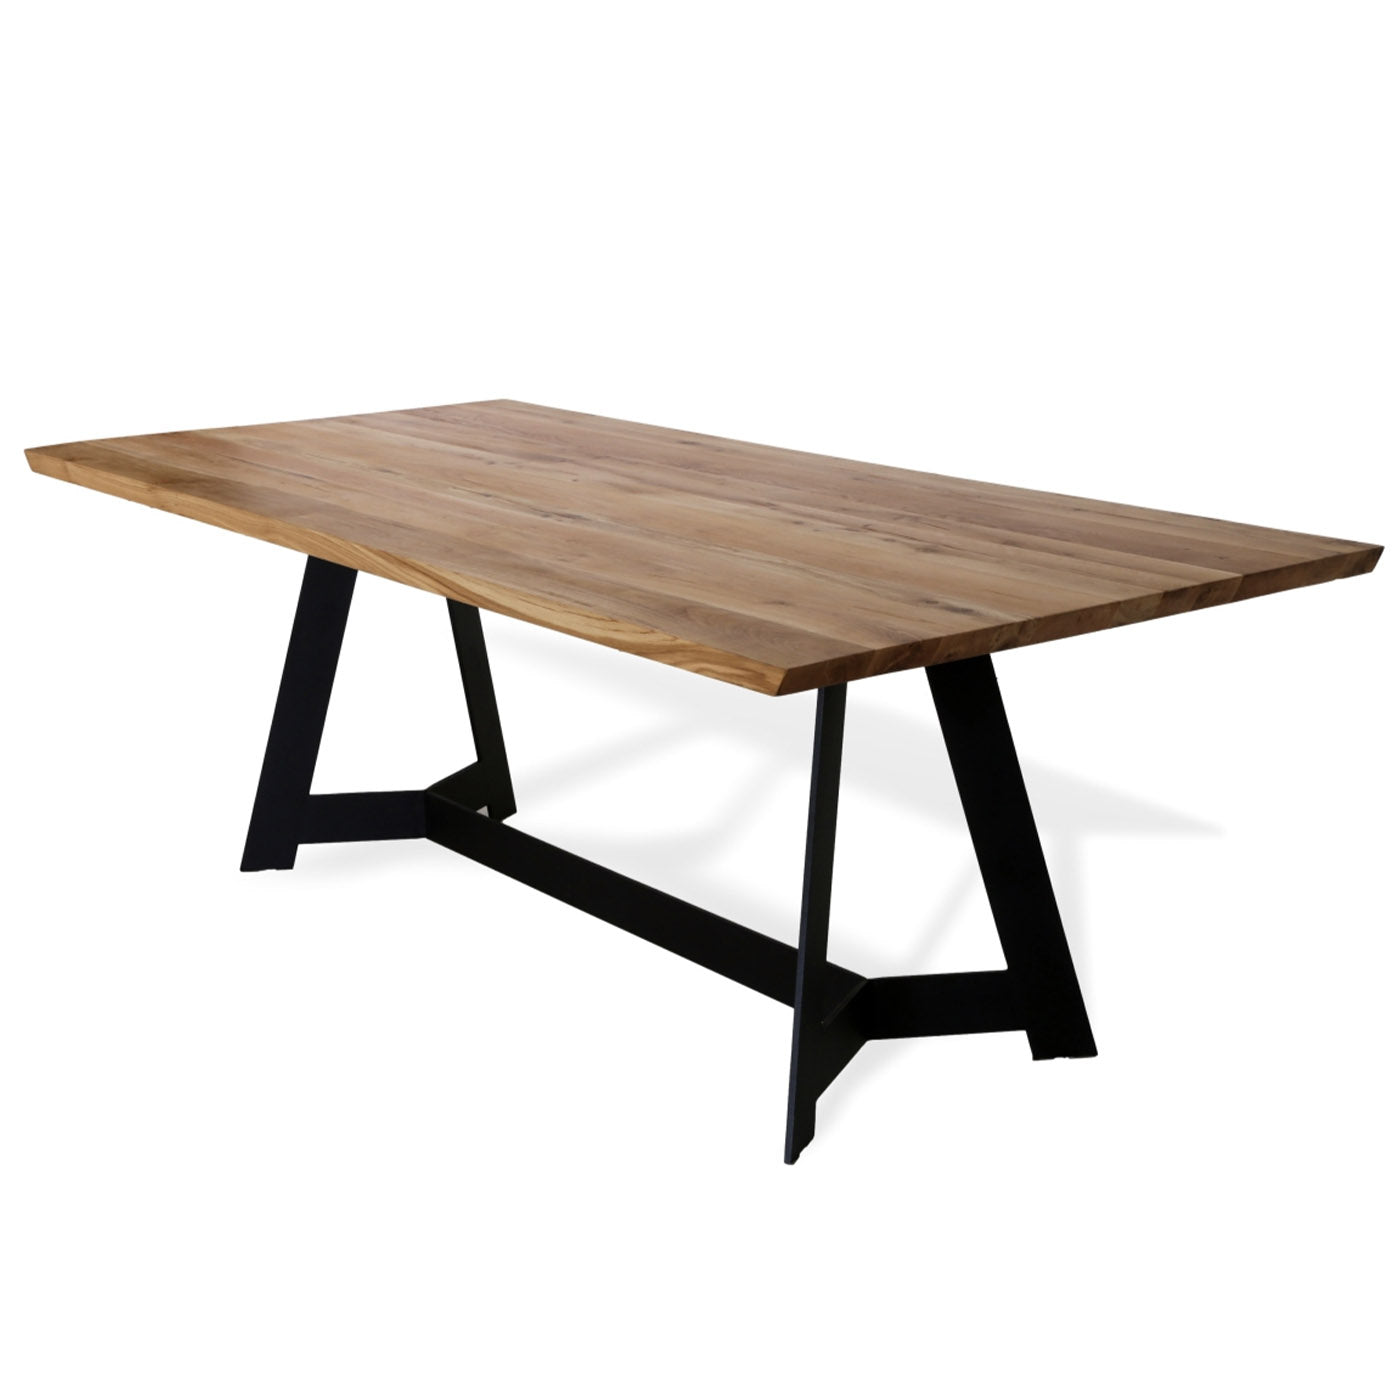 Durmast and Metal Rectangular Dining Table - Alternative view 3